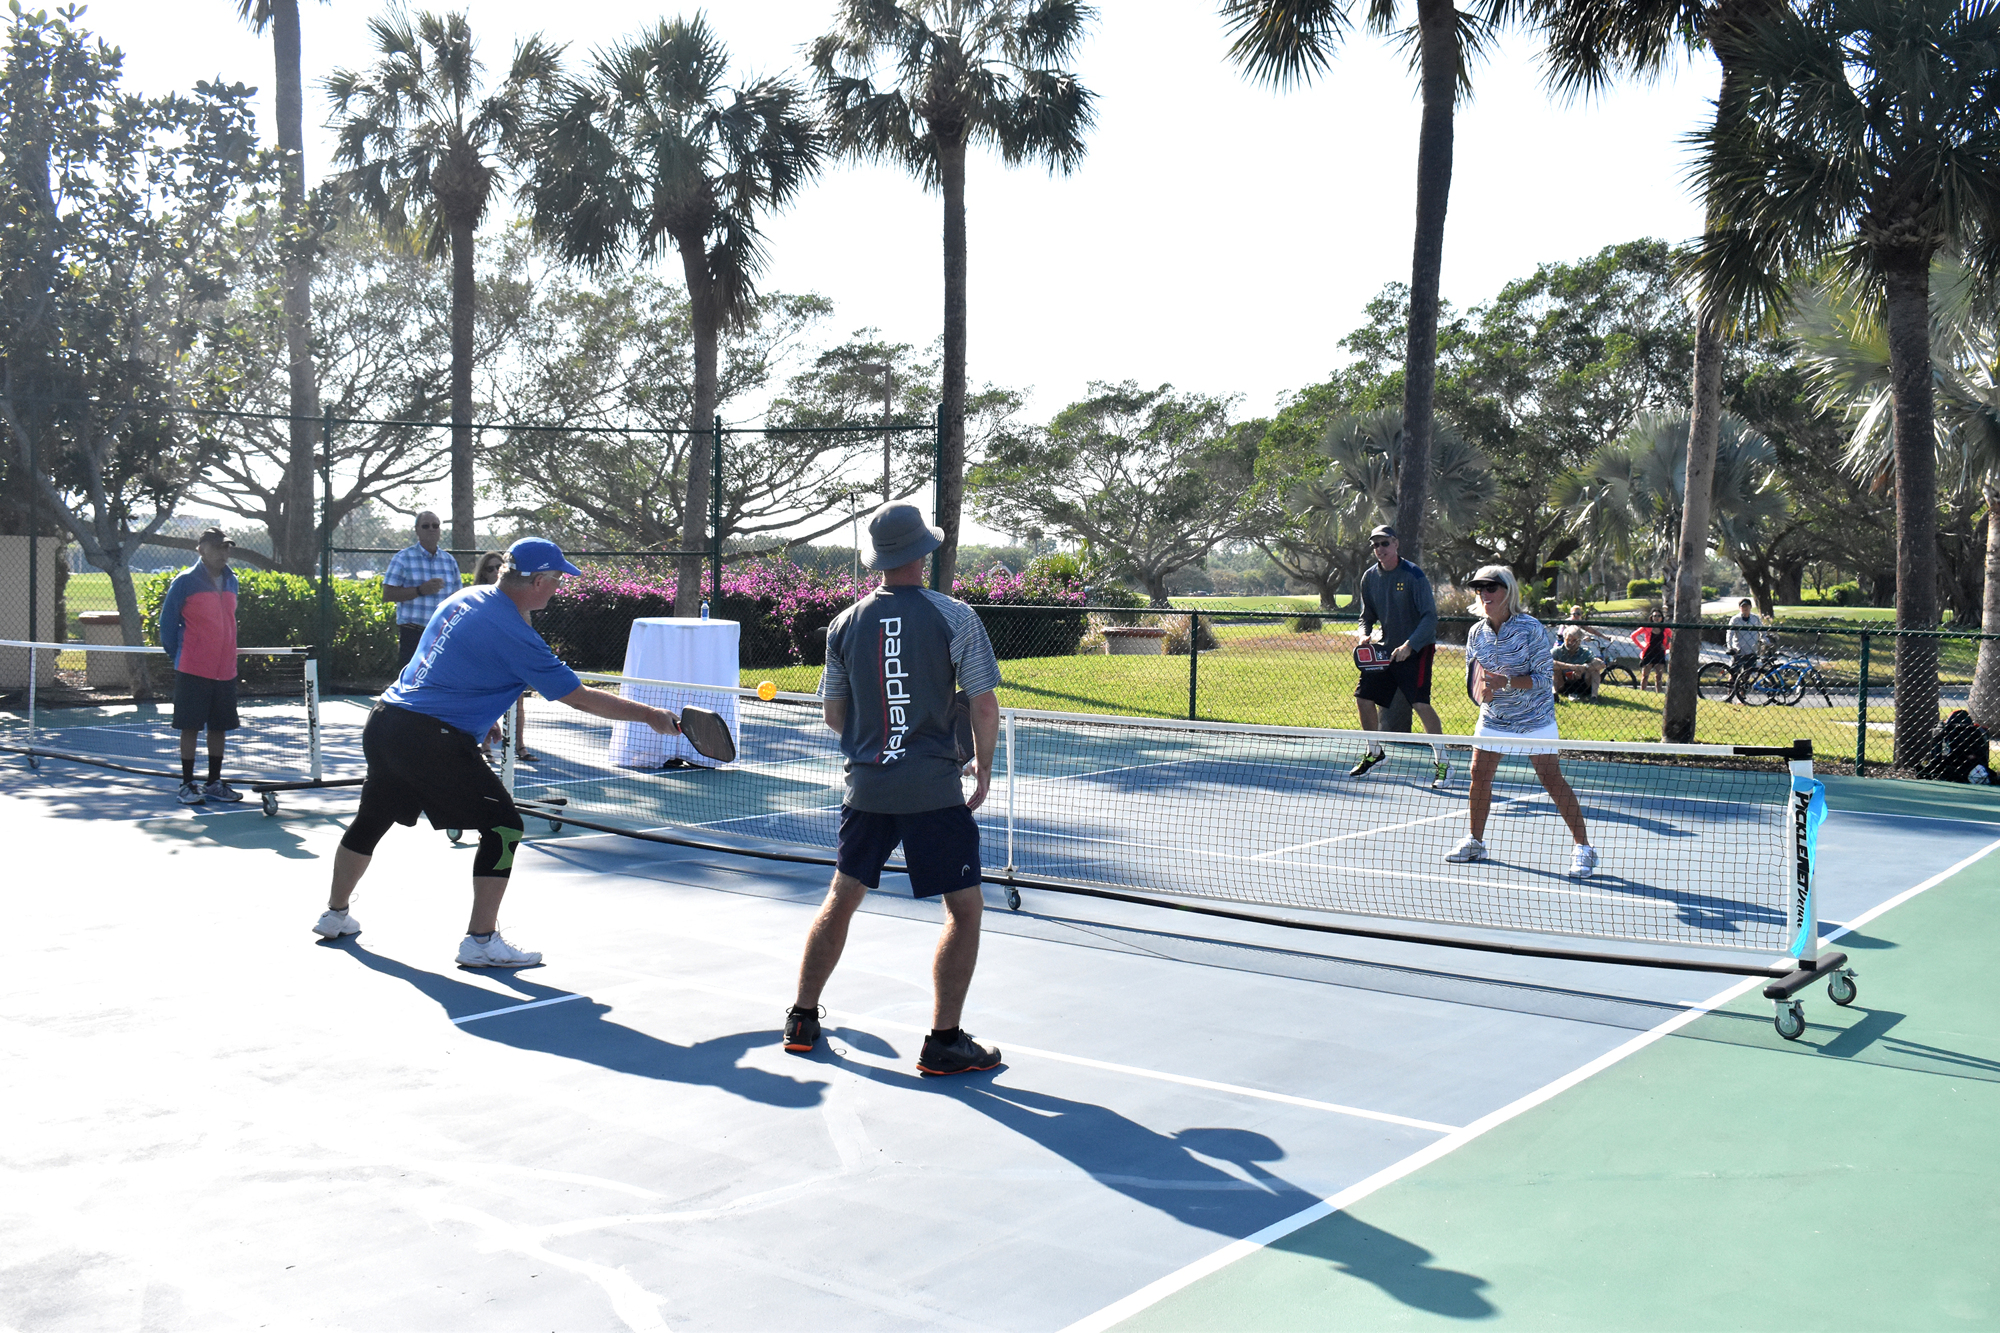 The courts were added to the club property following an increased interest in the sport.